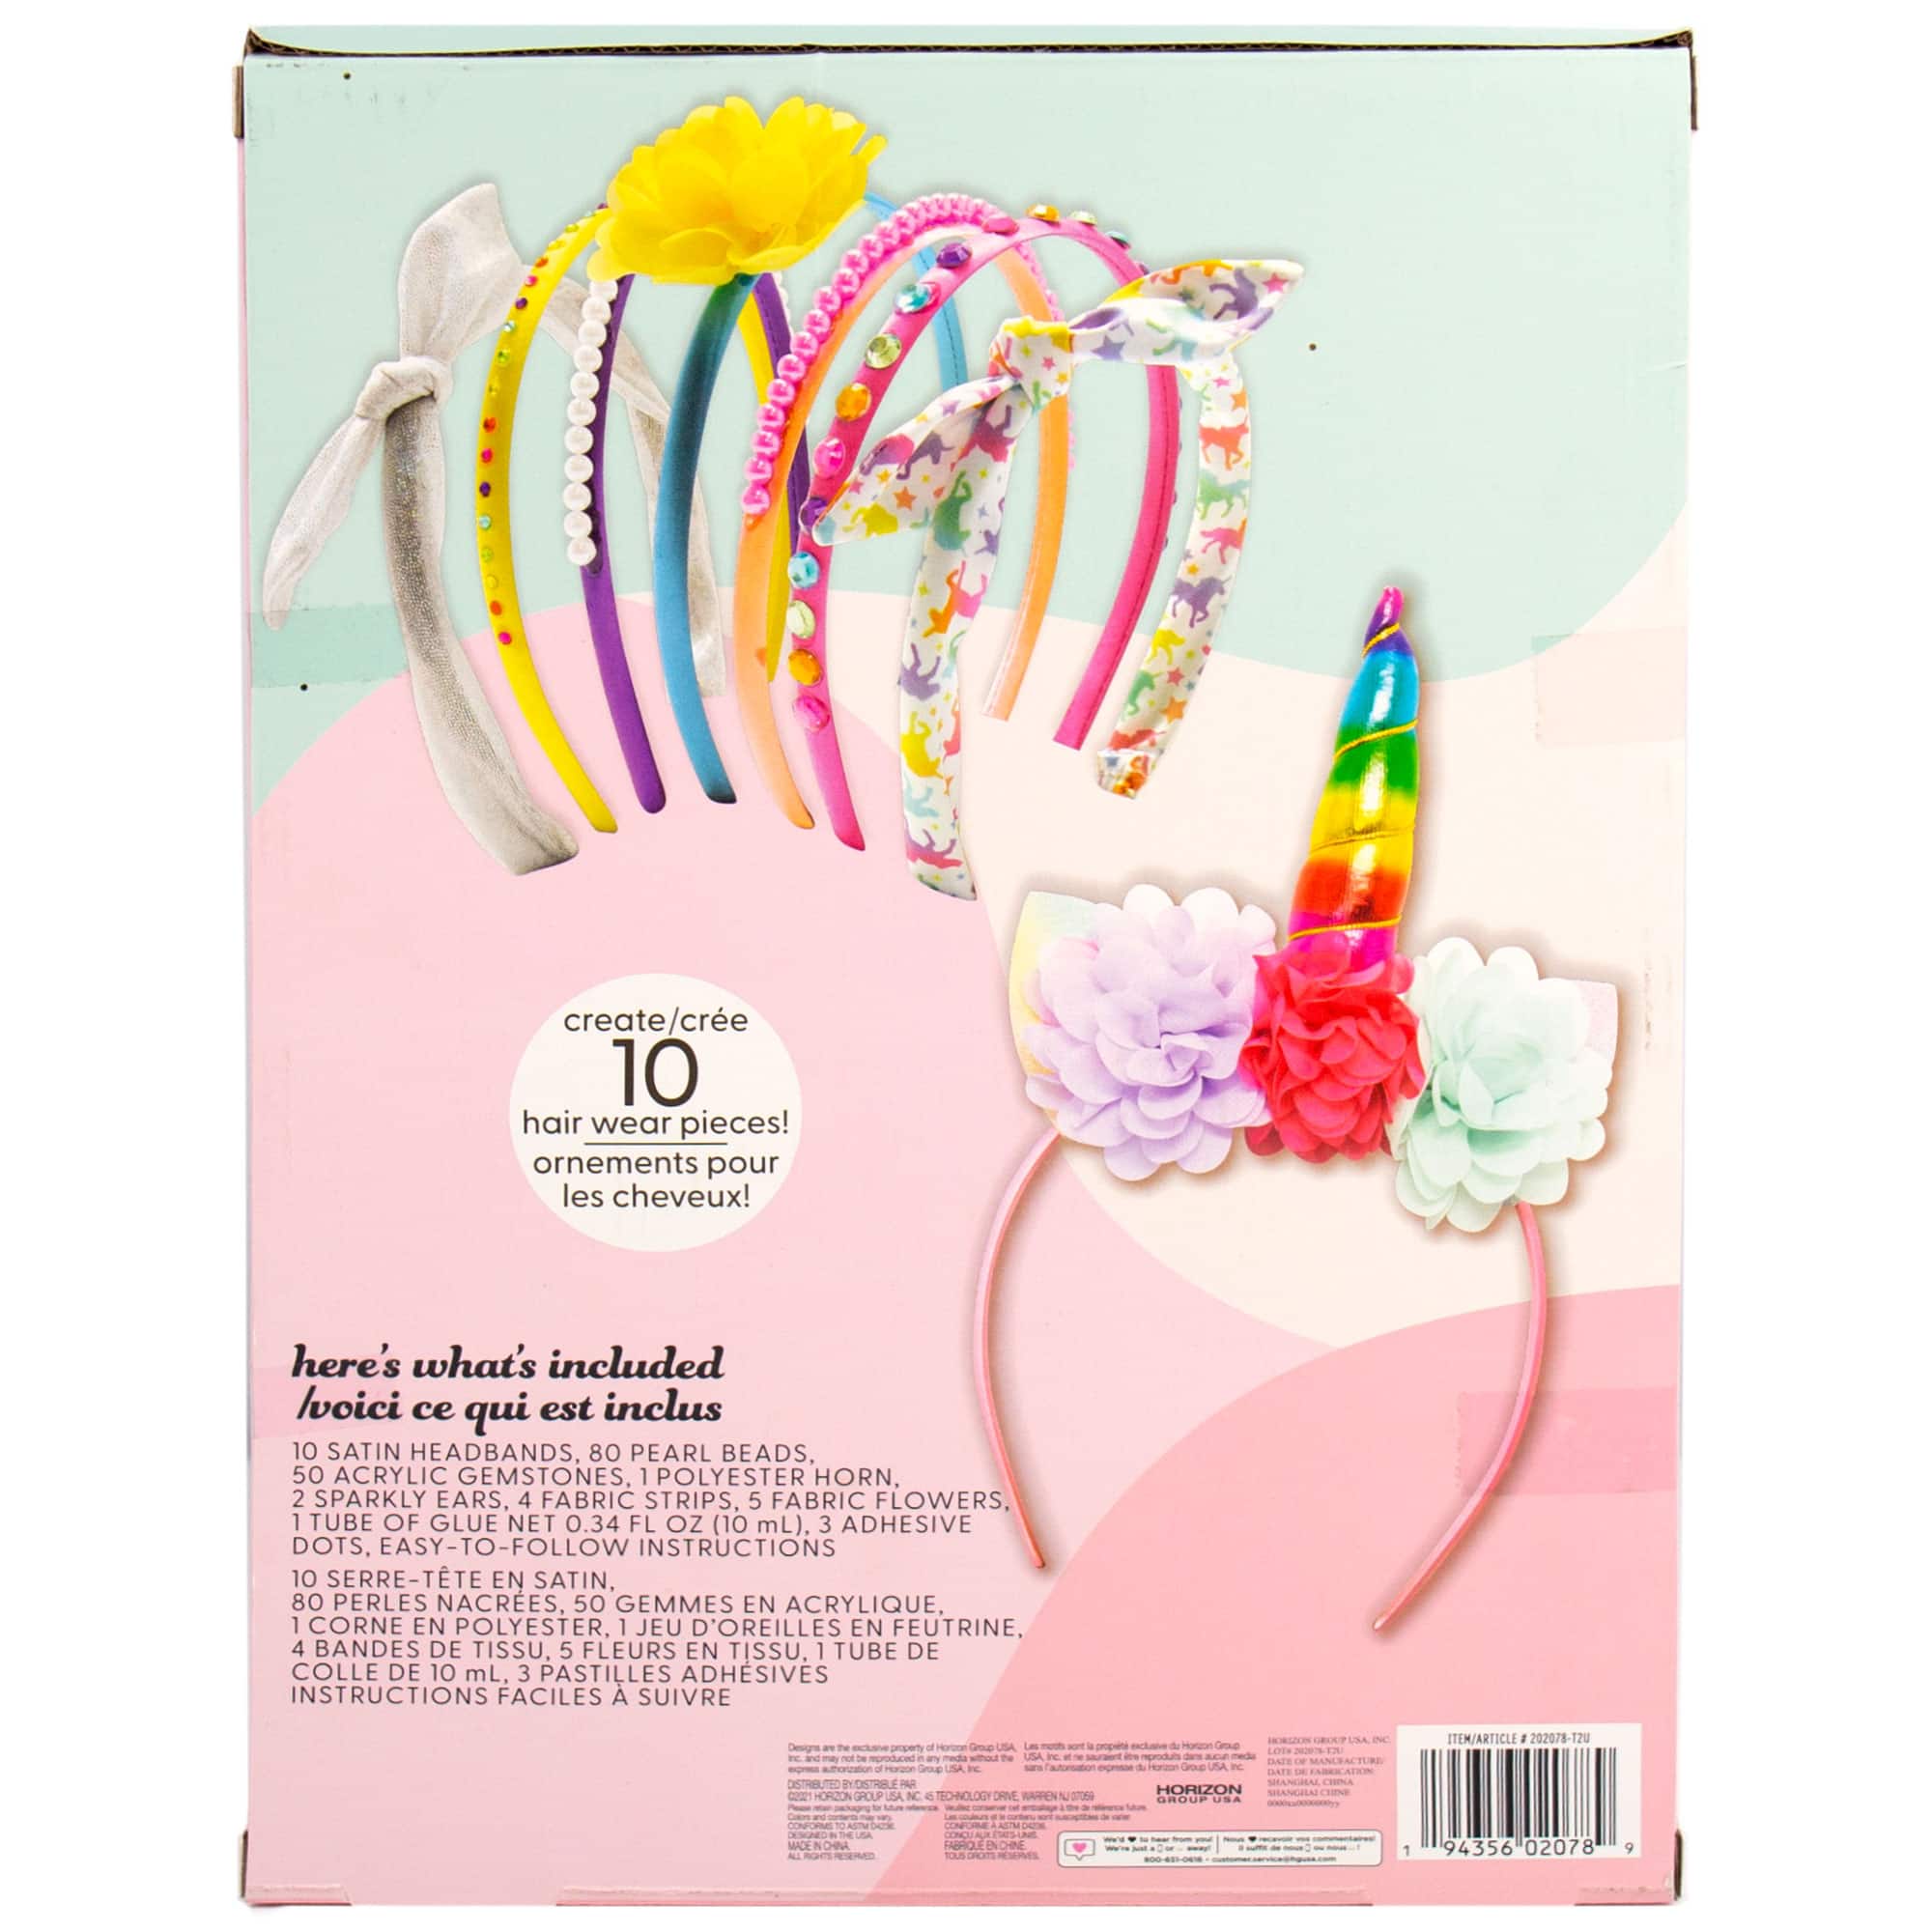 Oh Girl Pearl Stickon Hair Accessories - Pack of 100 Mix Size  Sticker/Stickon | Party Hair Accessories